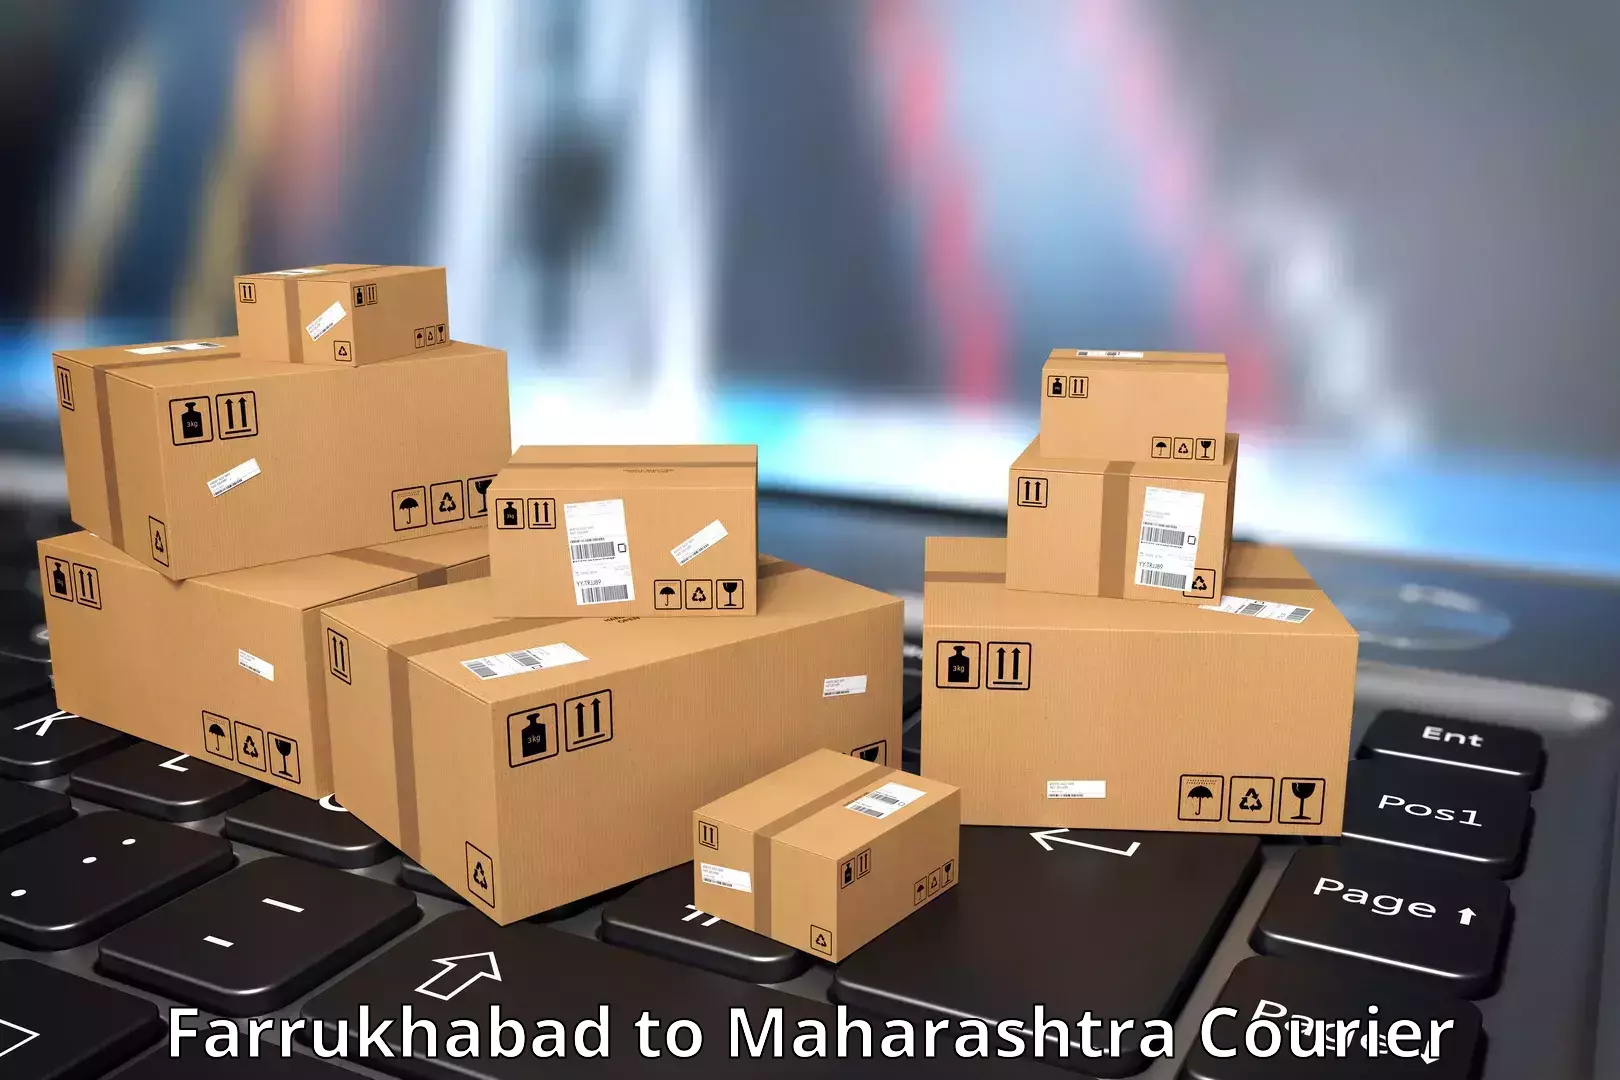 Express package handling in Farrukhabad to Maharashtra